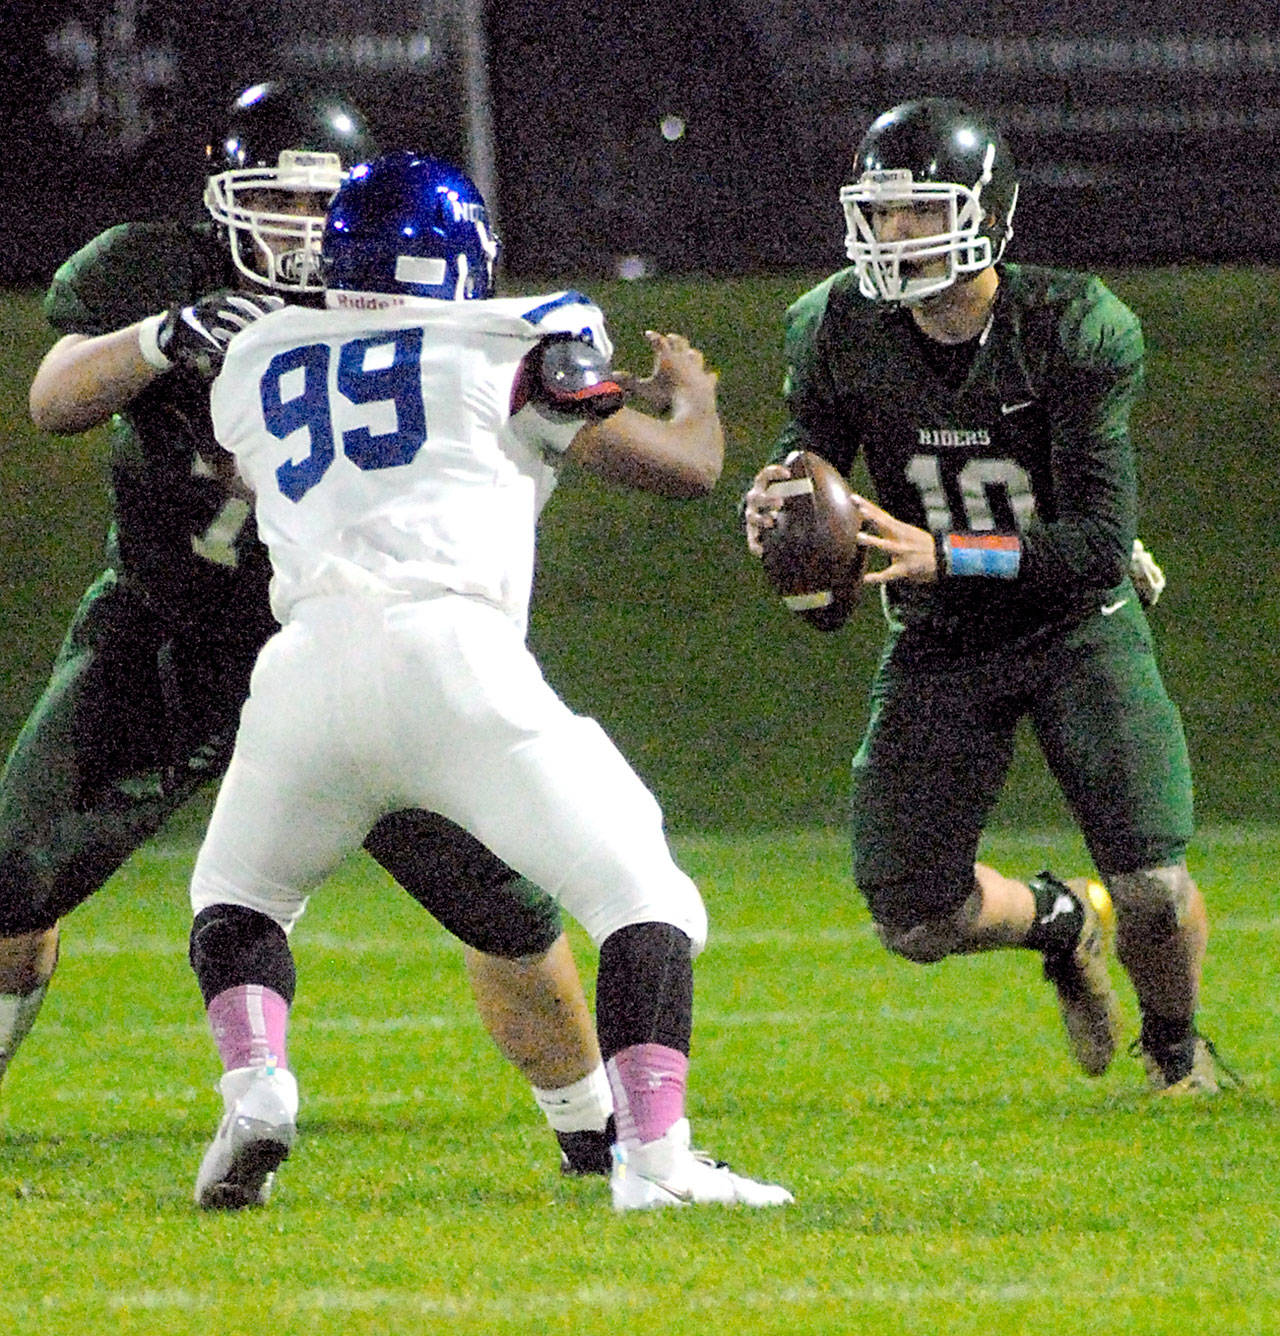 Keith Thorpe/Peninsula Daily News Port Angeles quarterback Brenden Roloson-Hines, right, looks downfield as teammate Darrell Duckett provides a block on North Mason’s Dom Dixon in the first quarter on Friday night at Port Angeles Civic Field.